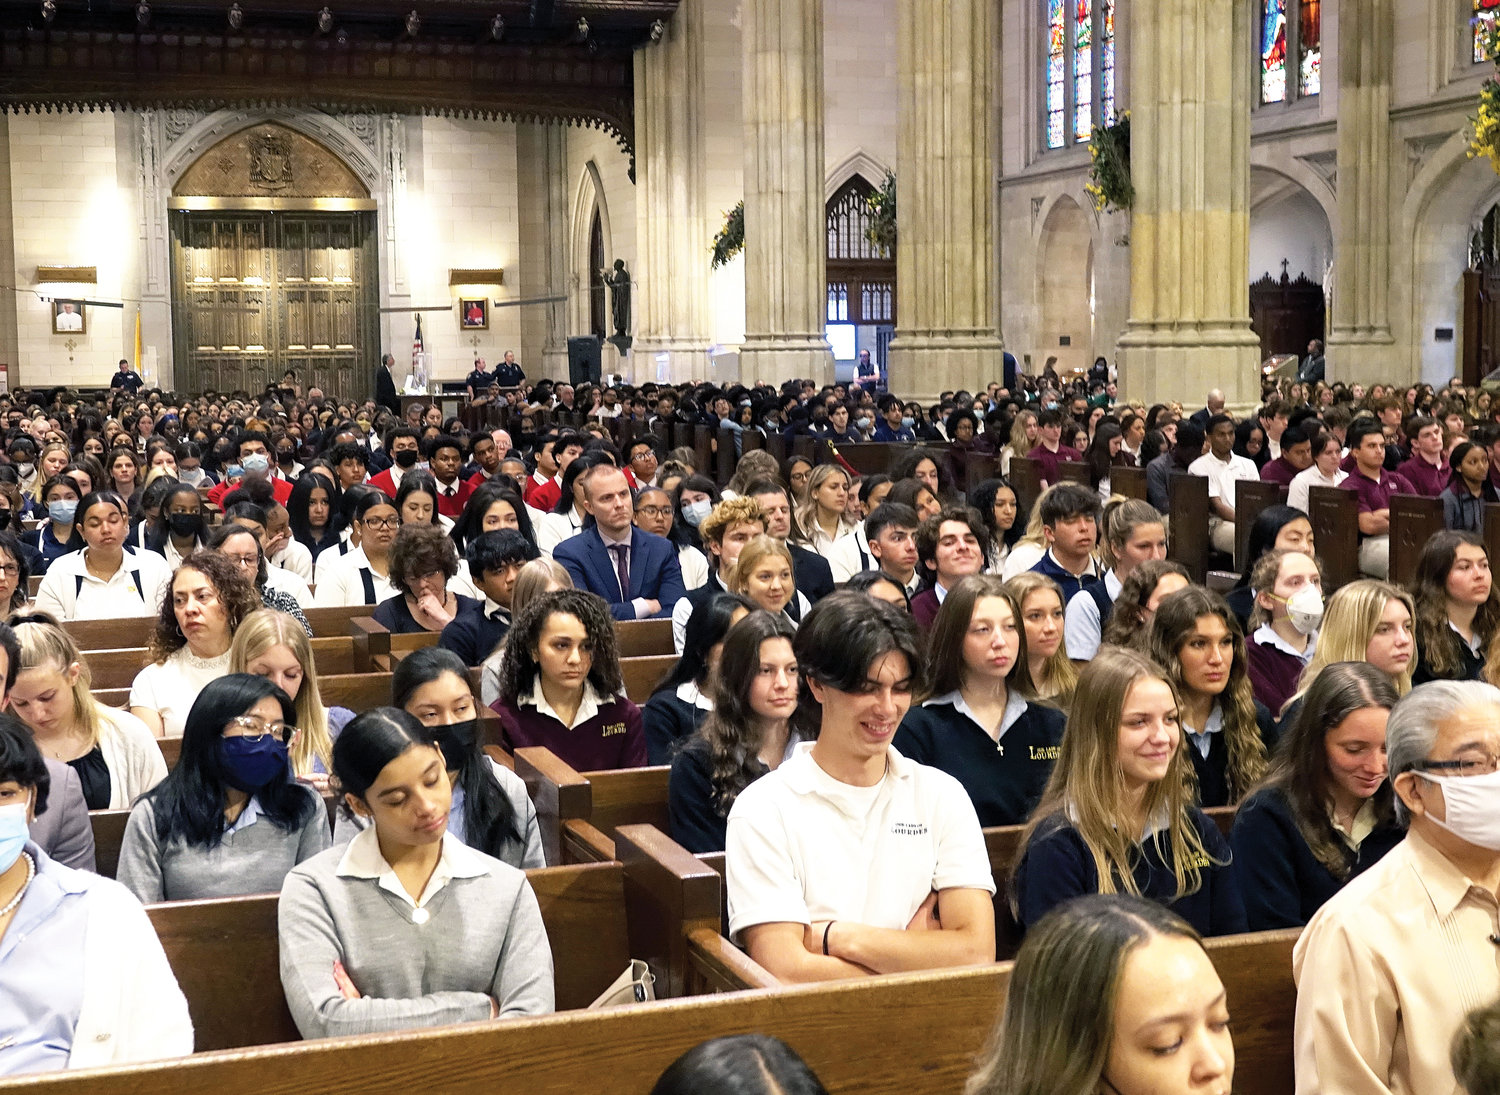 The pews were packed with graduating seniors from across the archdiocese during the  Eucharistic Liturgy for the Class of 2022 Cardinal Dolan celebrated at St. Patrick’s Cathedral May 18.